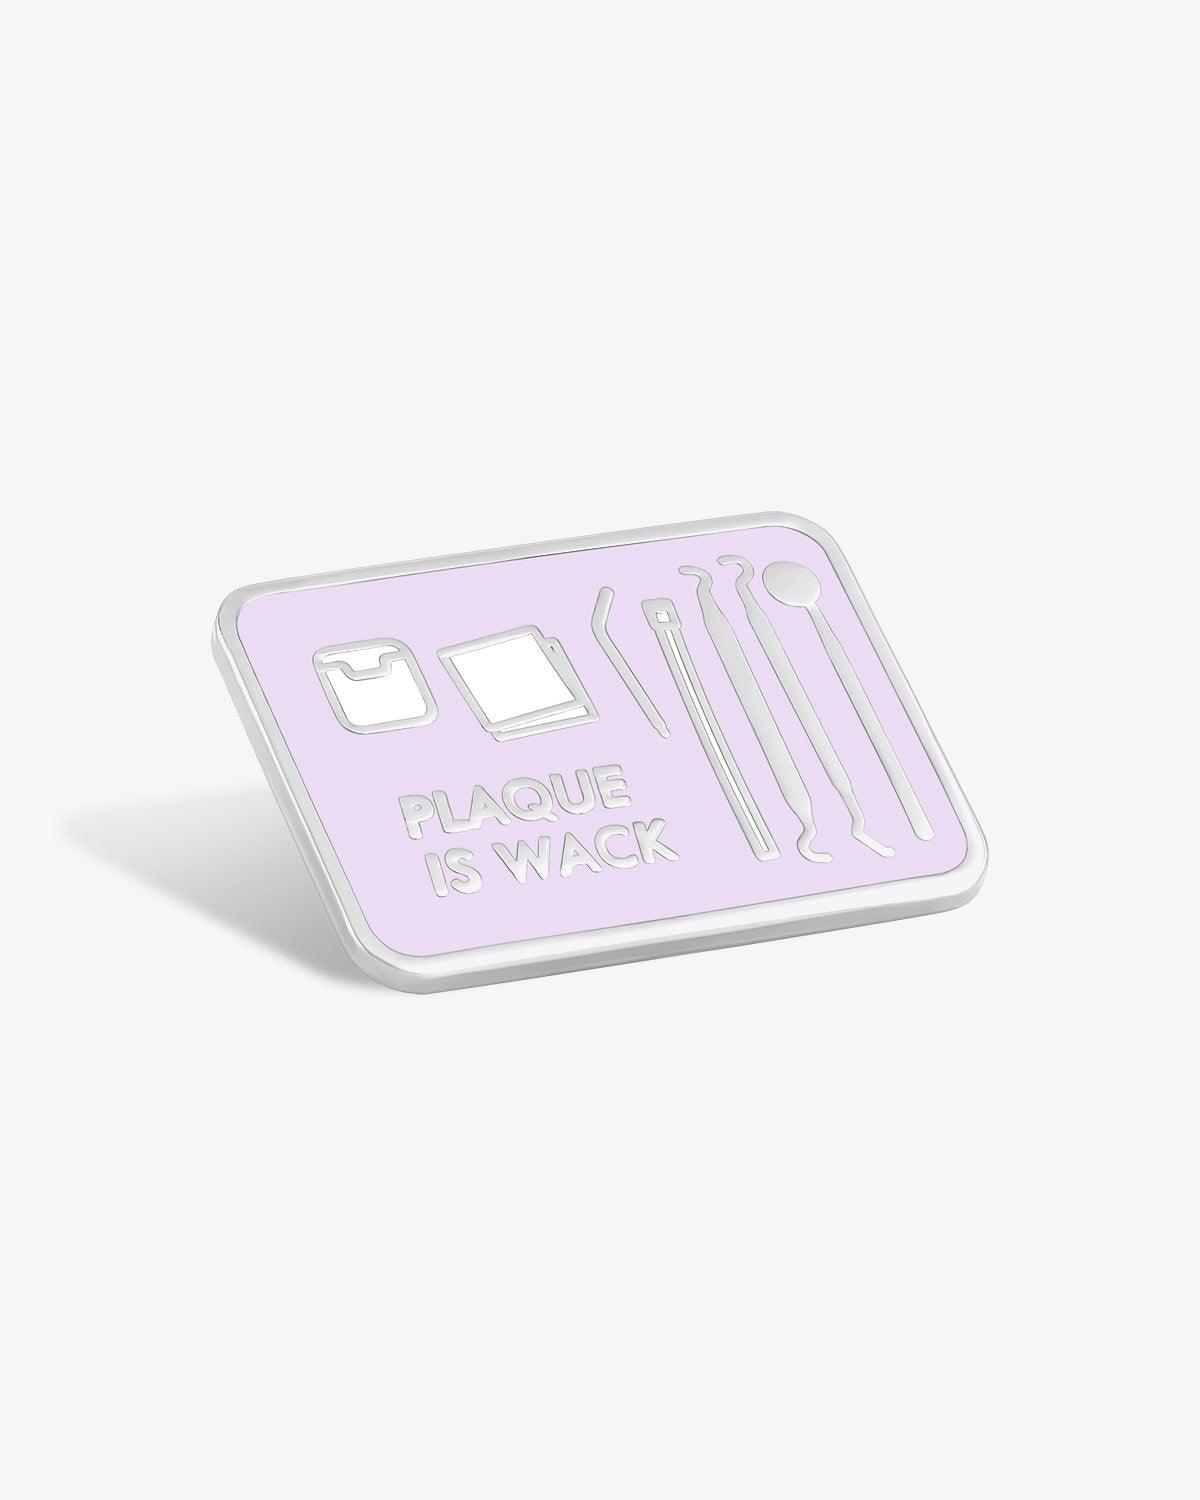 Plaque Is Wack (Dental Tray) Lapel Pin - Gifts for Dentists | V Coterie | V Coterie